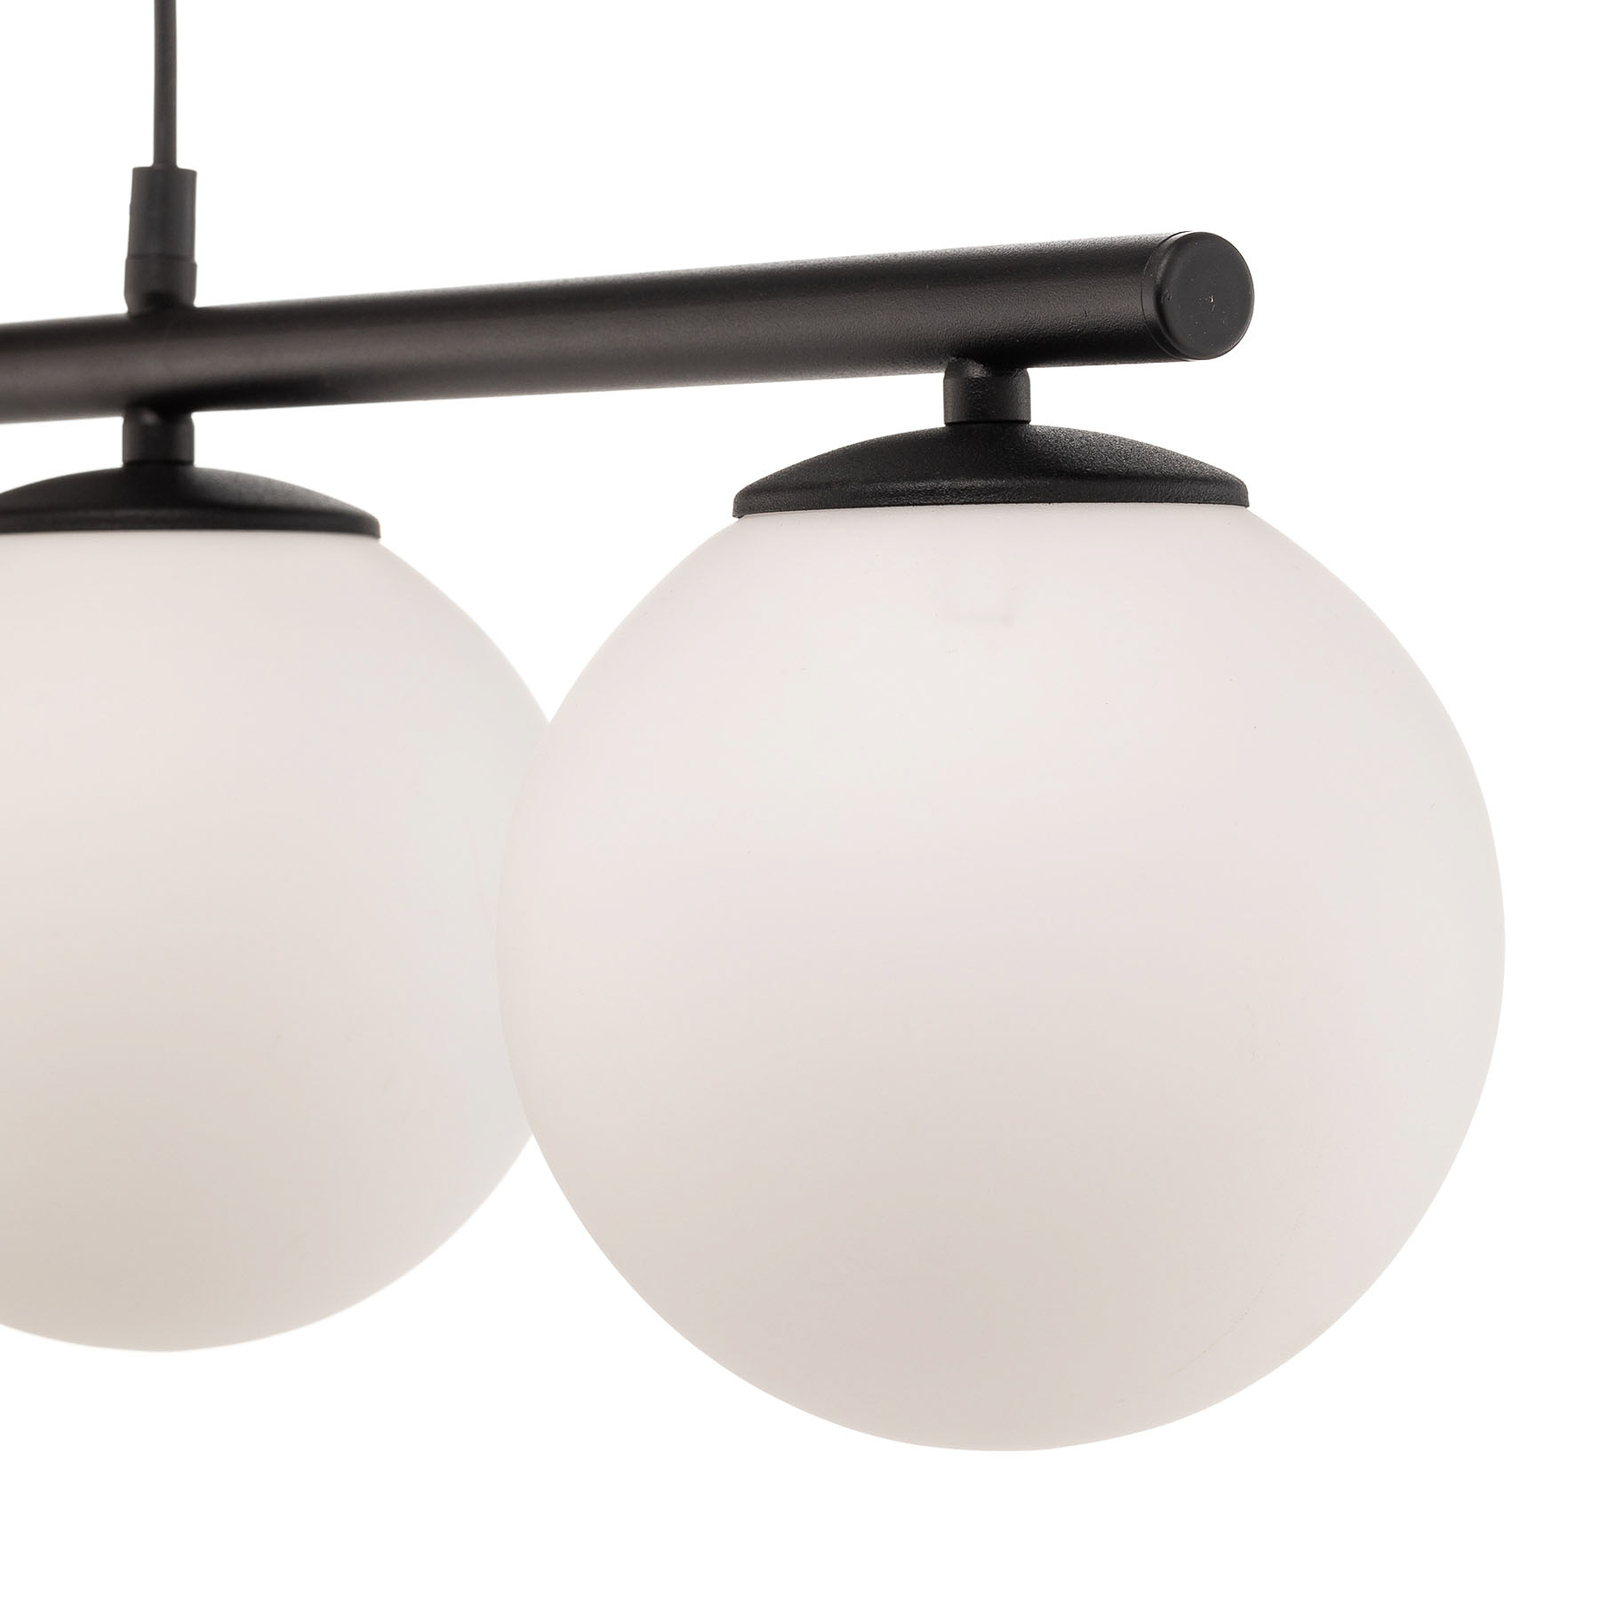 Maxi pendant light with glass shades, 4-bulb